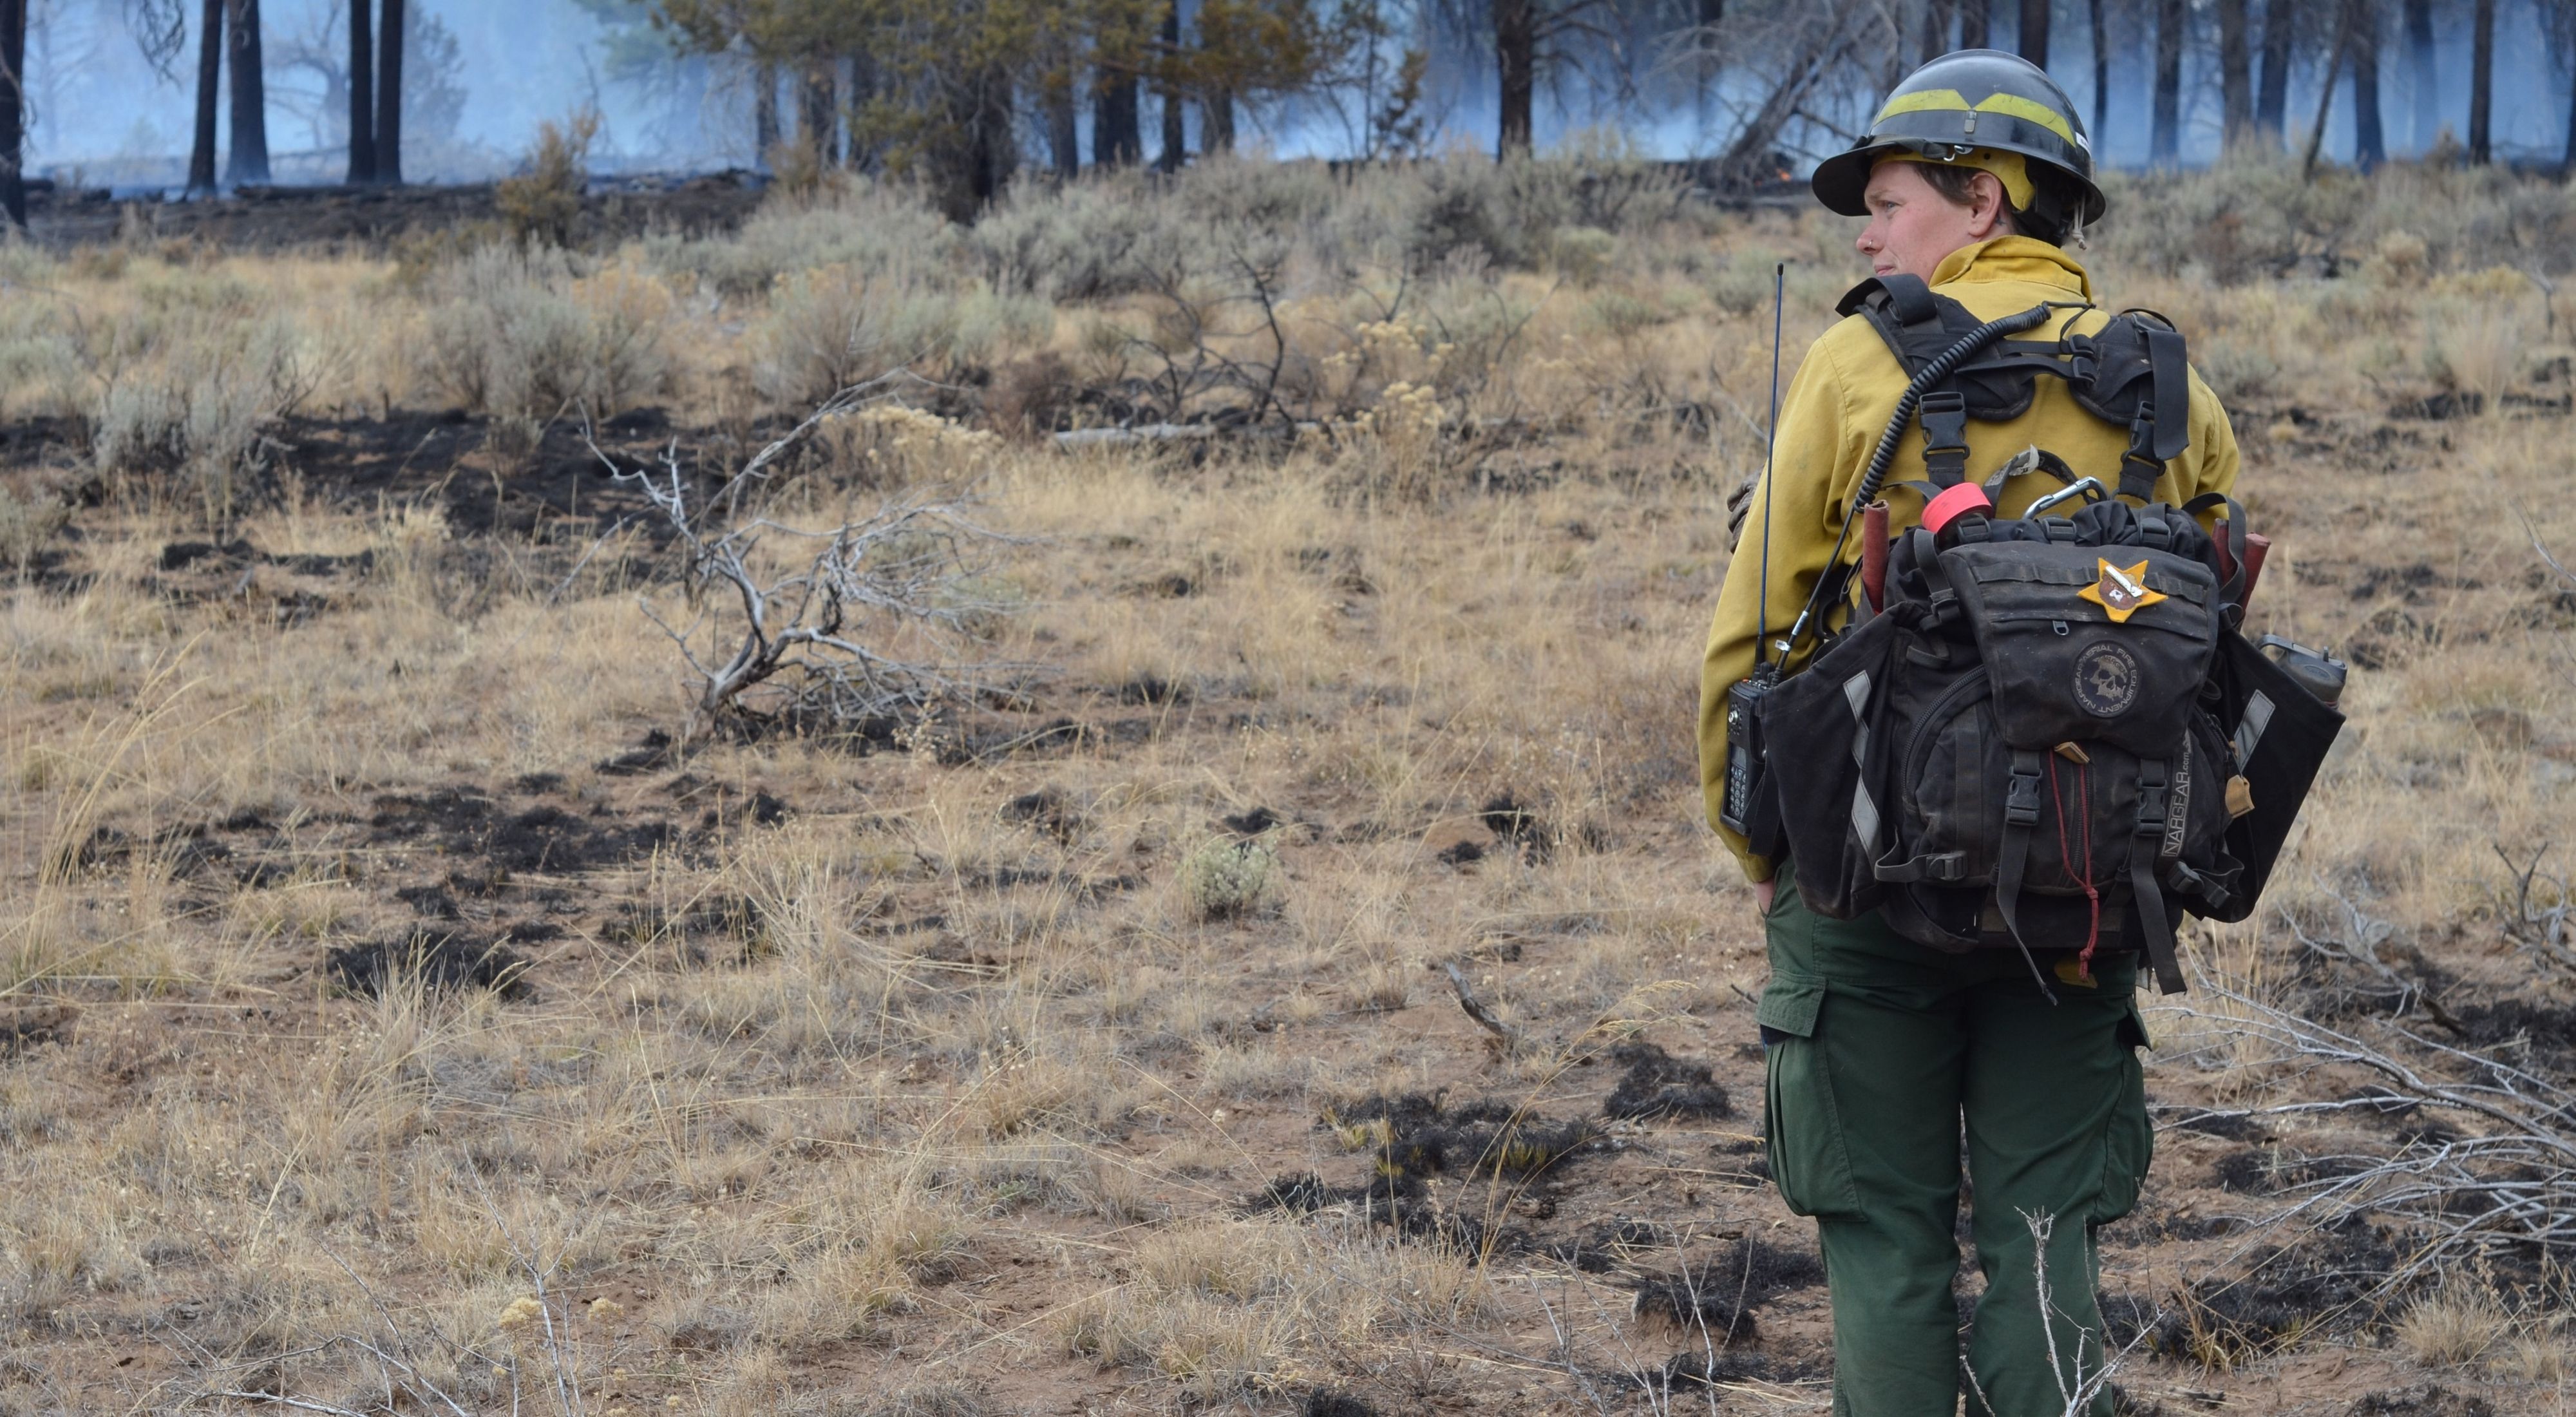 TNC Oregon Burn Boss Katie Sauerbrey stands in fire practitioner gear with their back turned and a forest in front of her.